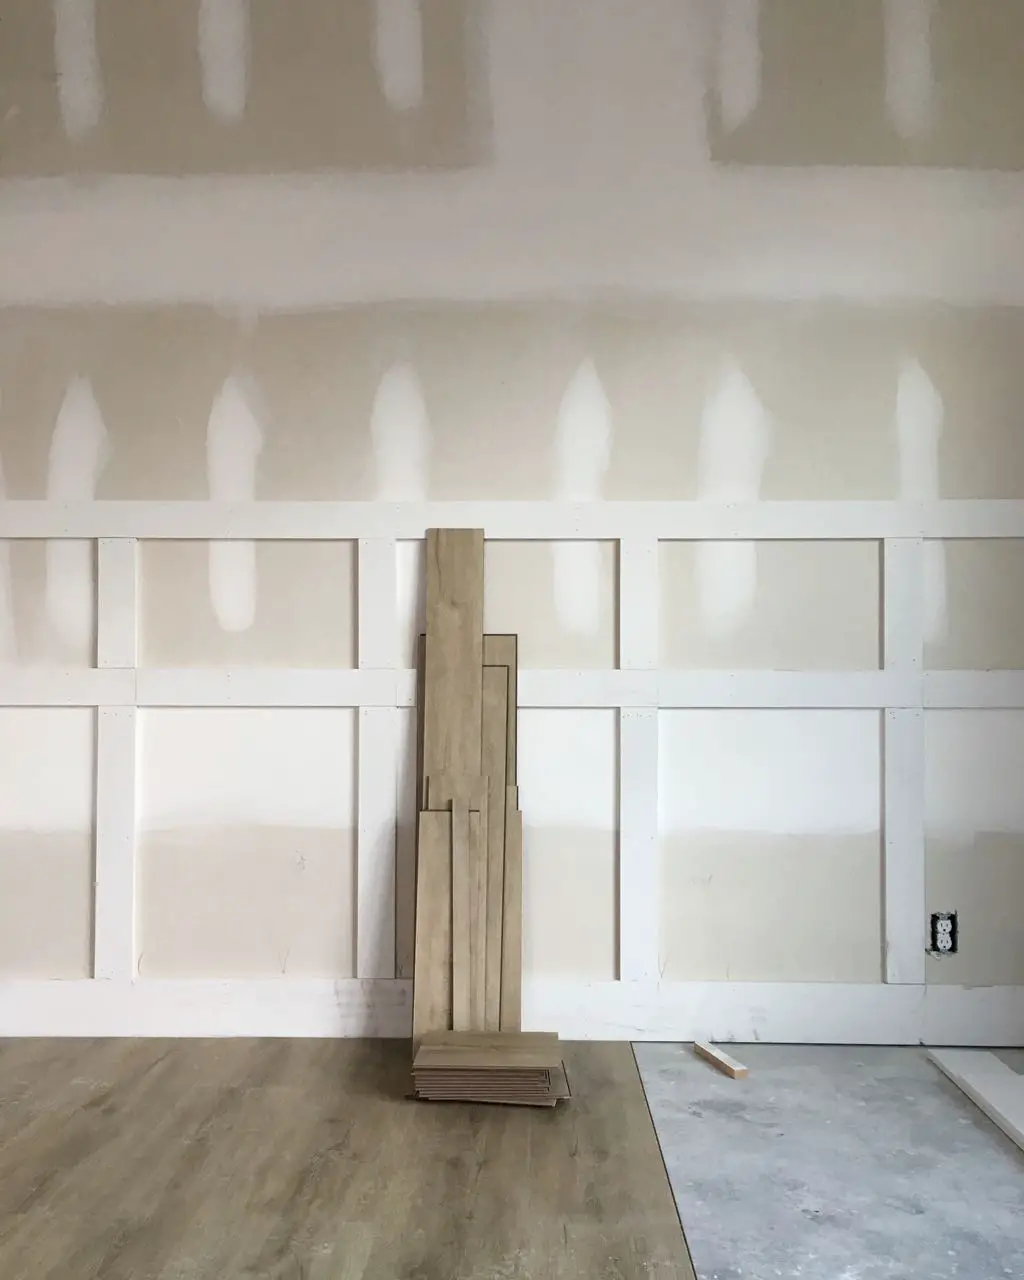 Guest House Progress: Flooring, Trim—and some Tile Drama